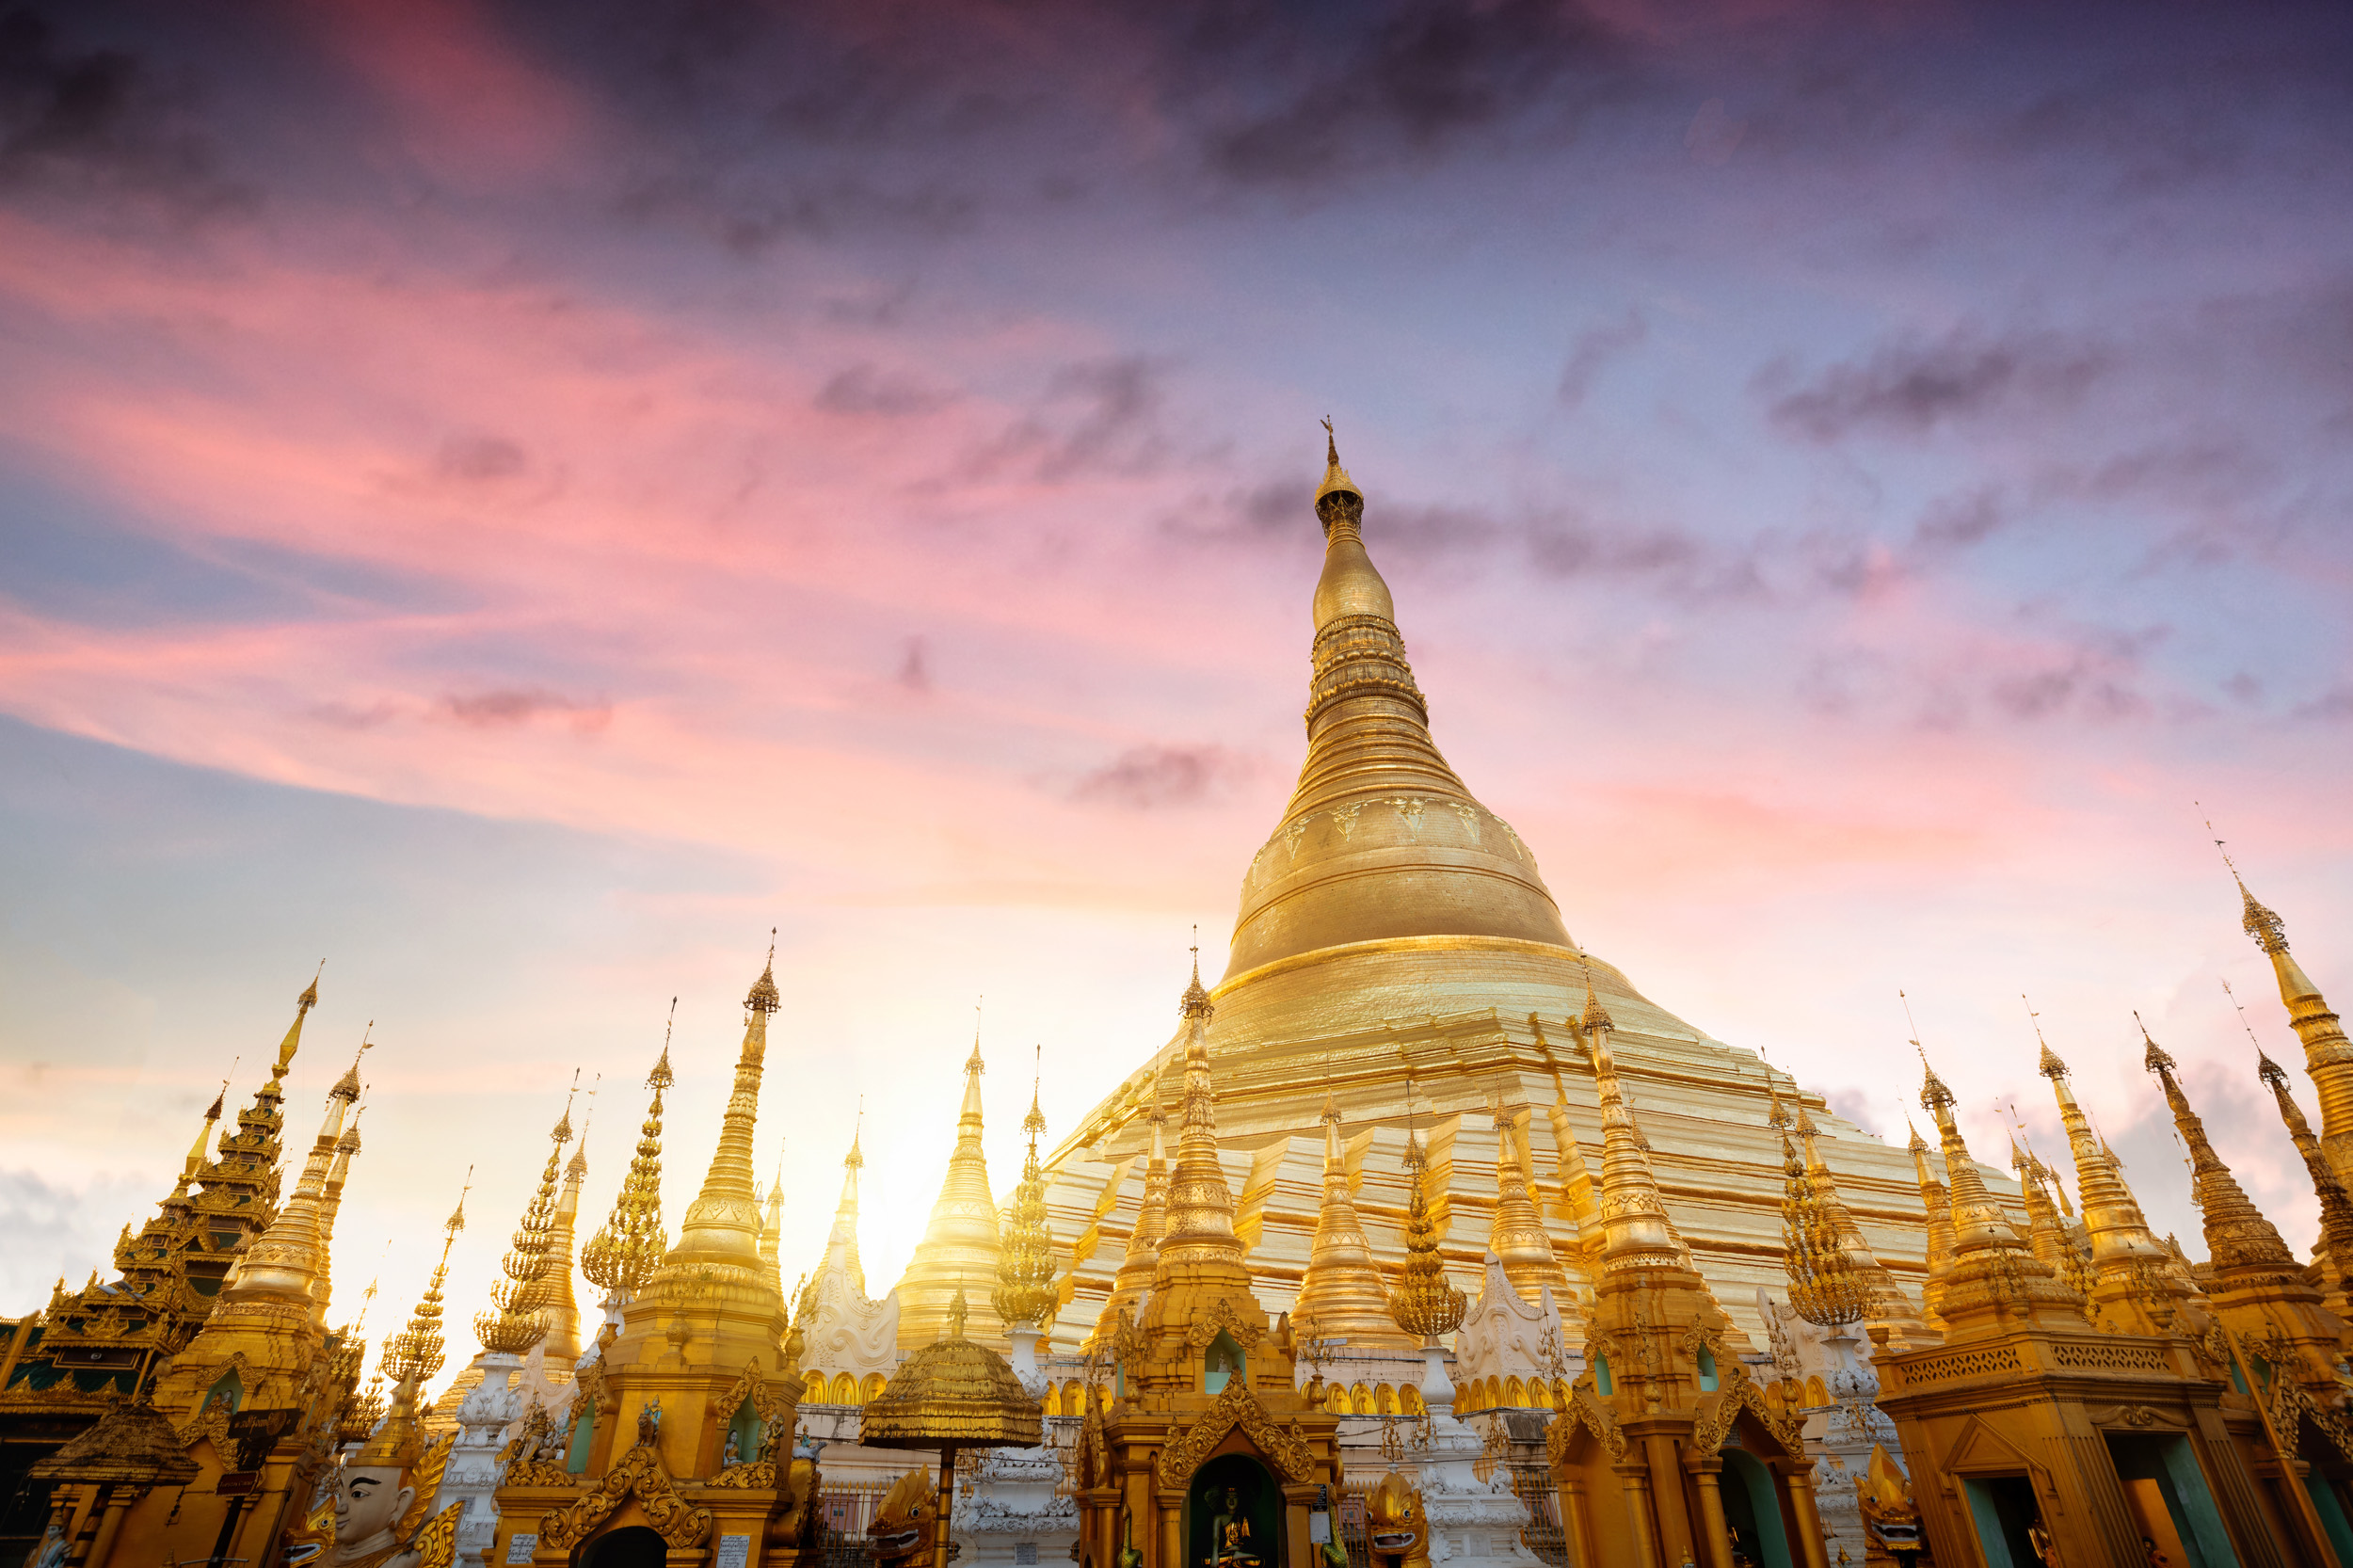 A large golden temple surrounded by smaller spires, at sunset